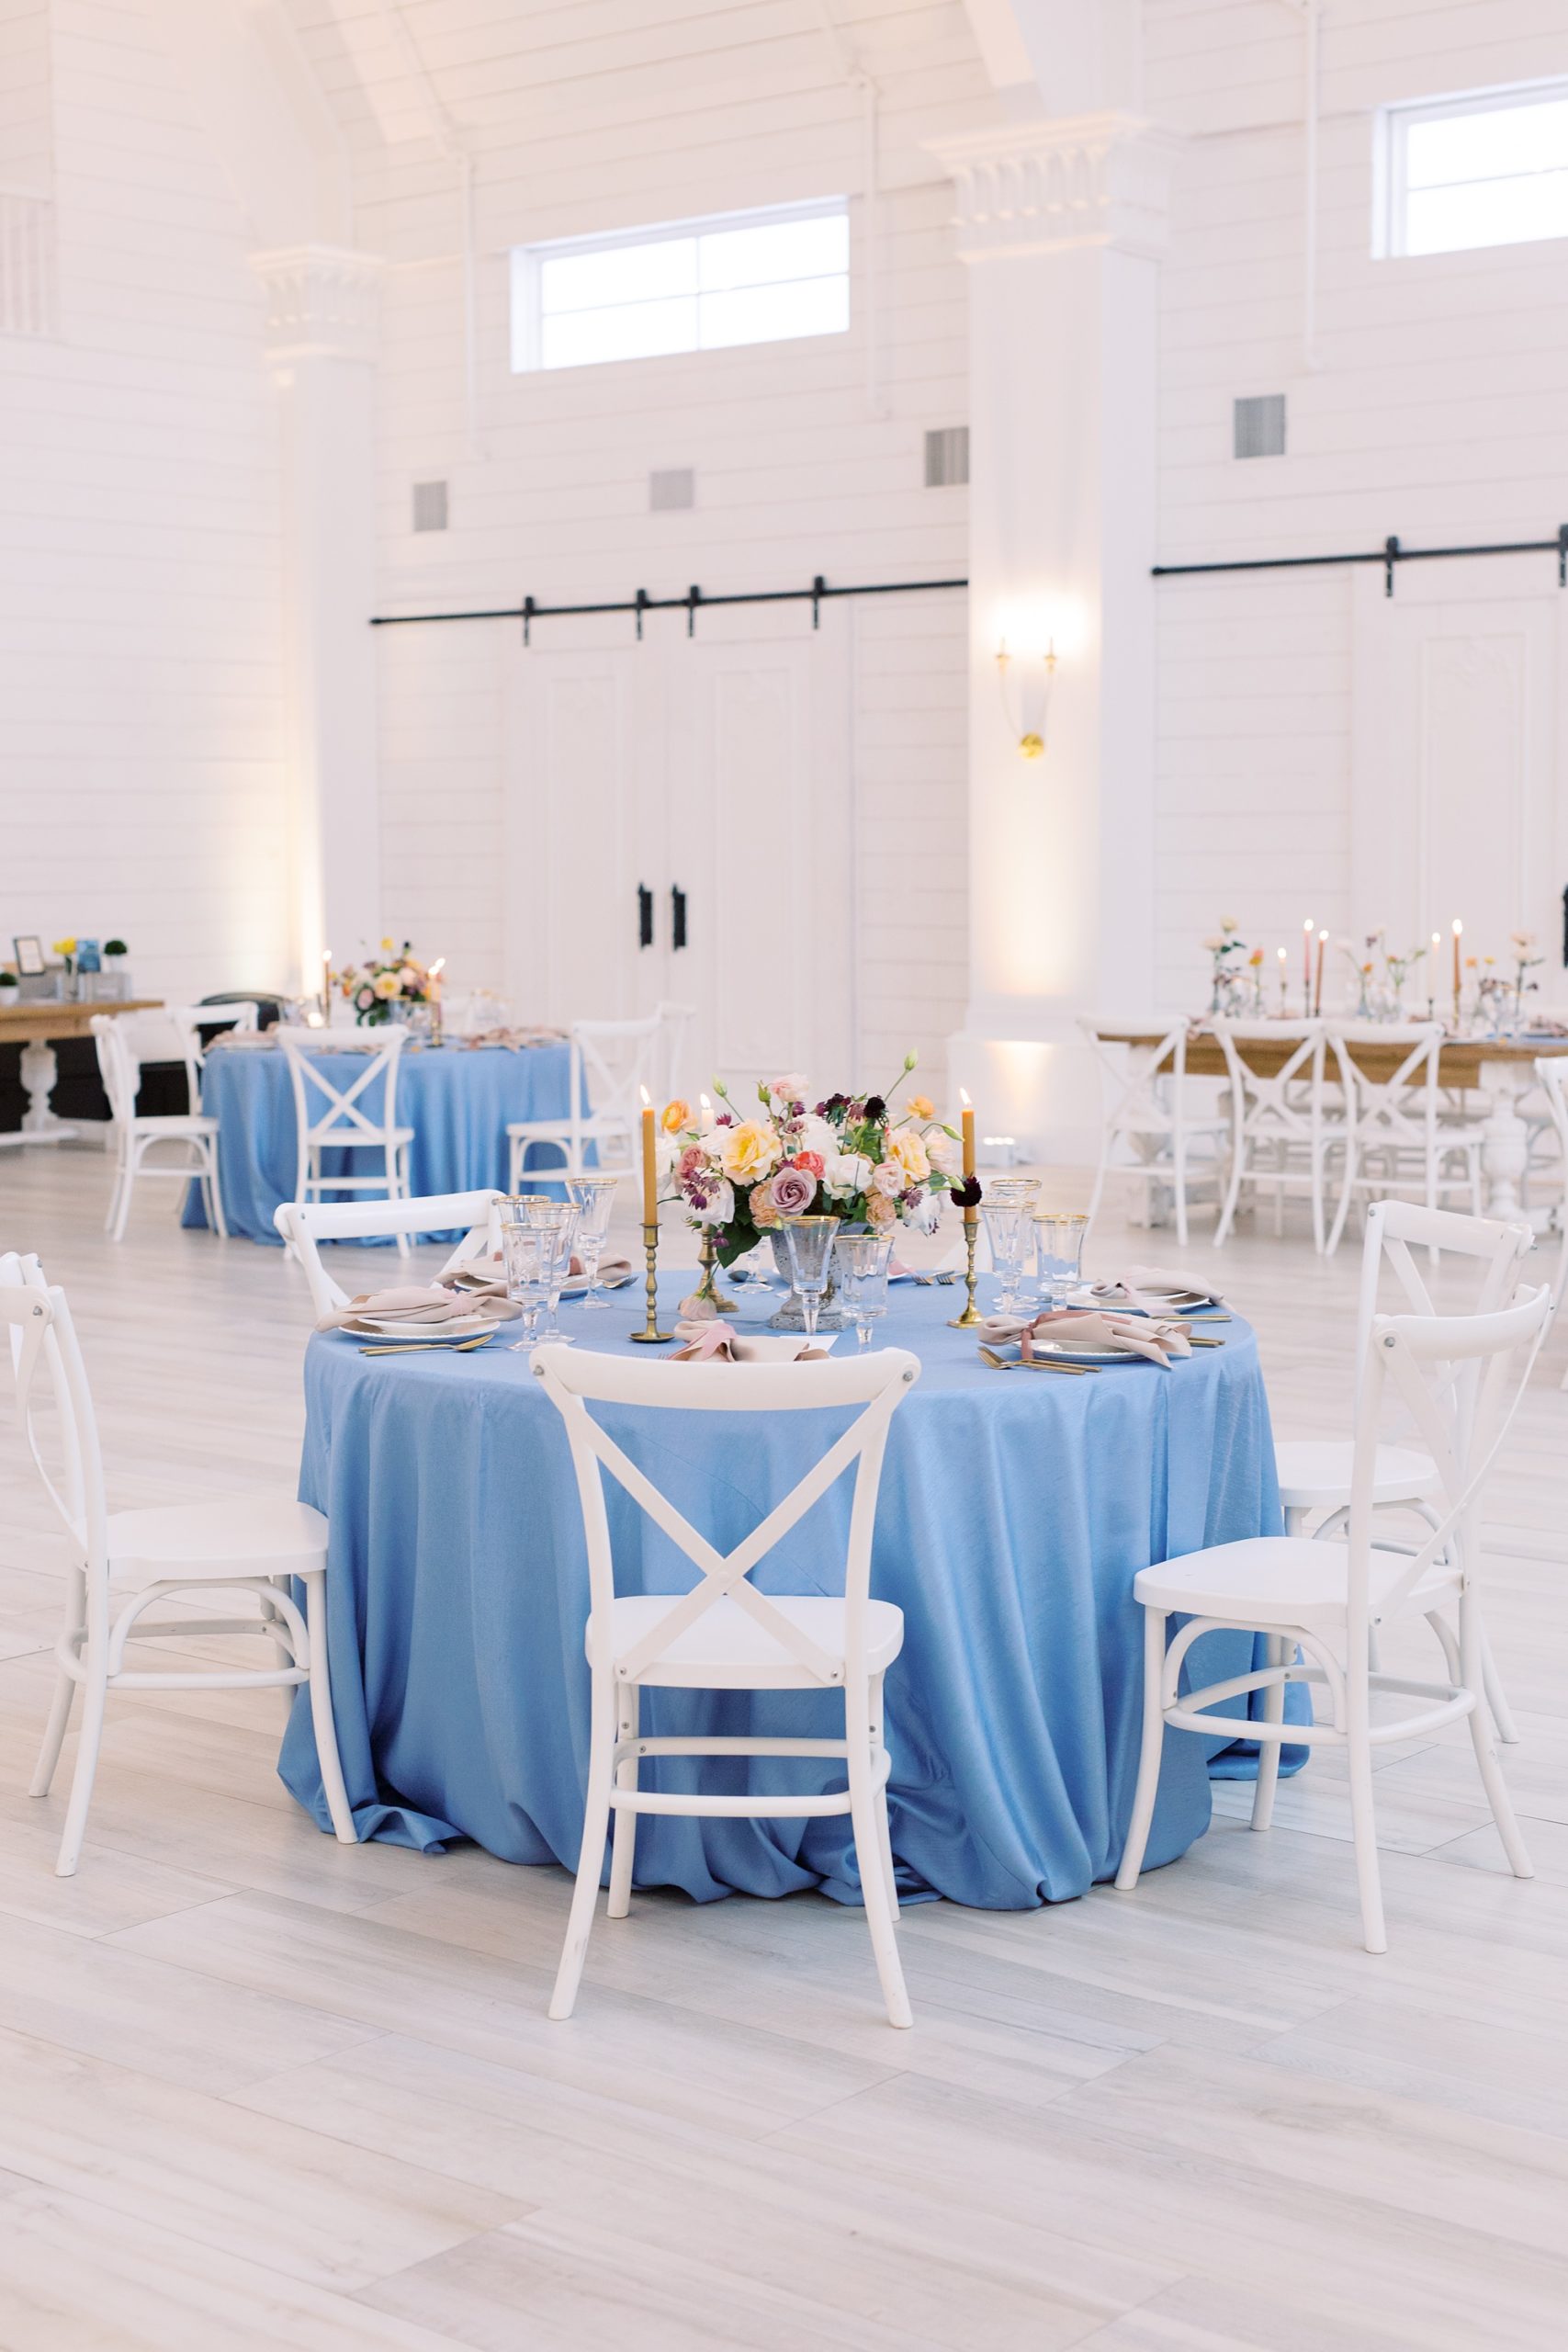 Texas wedding reception inspiration with blue and gold details